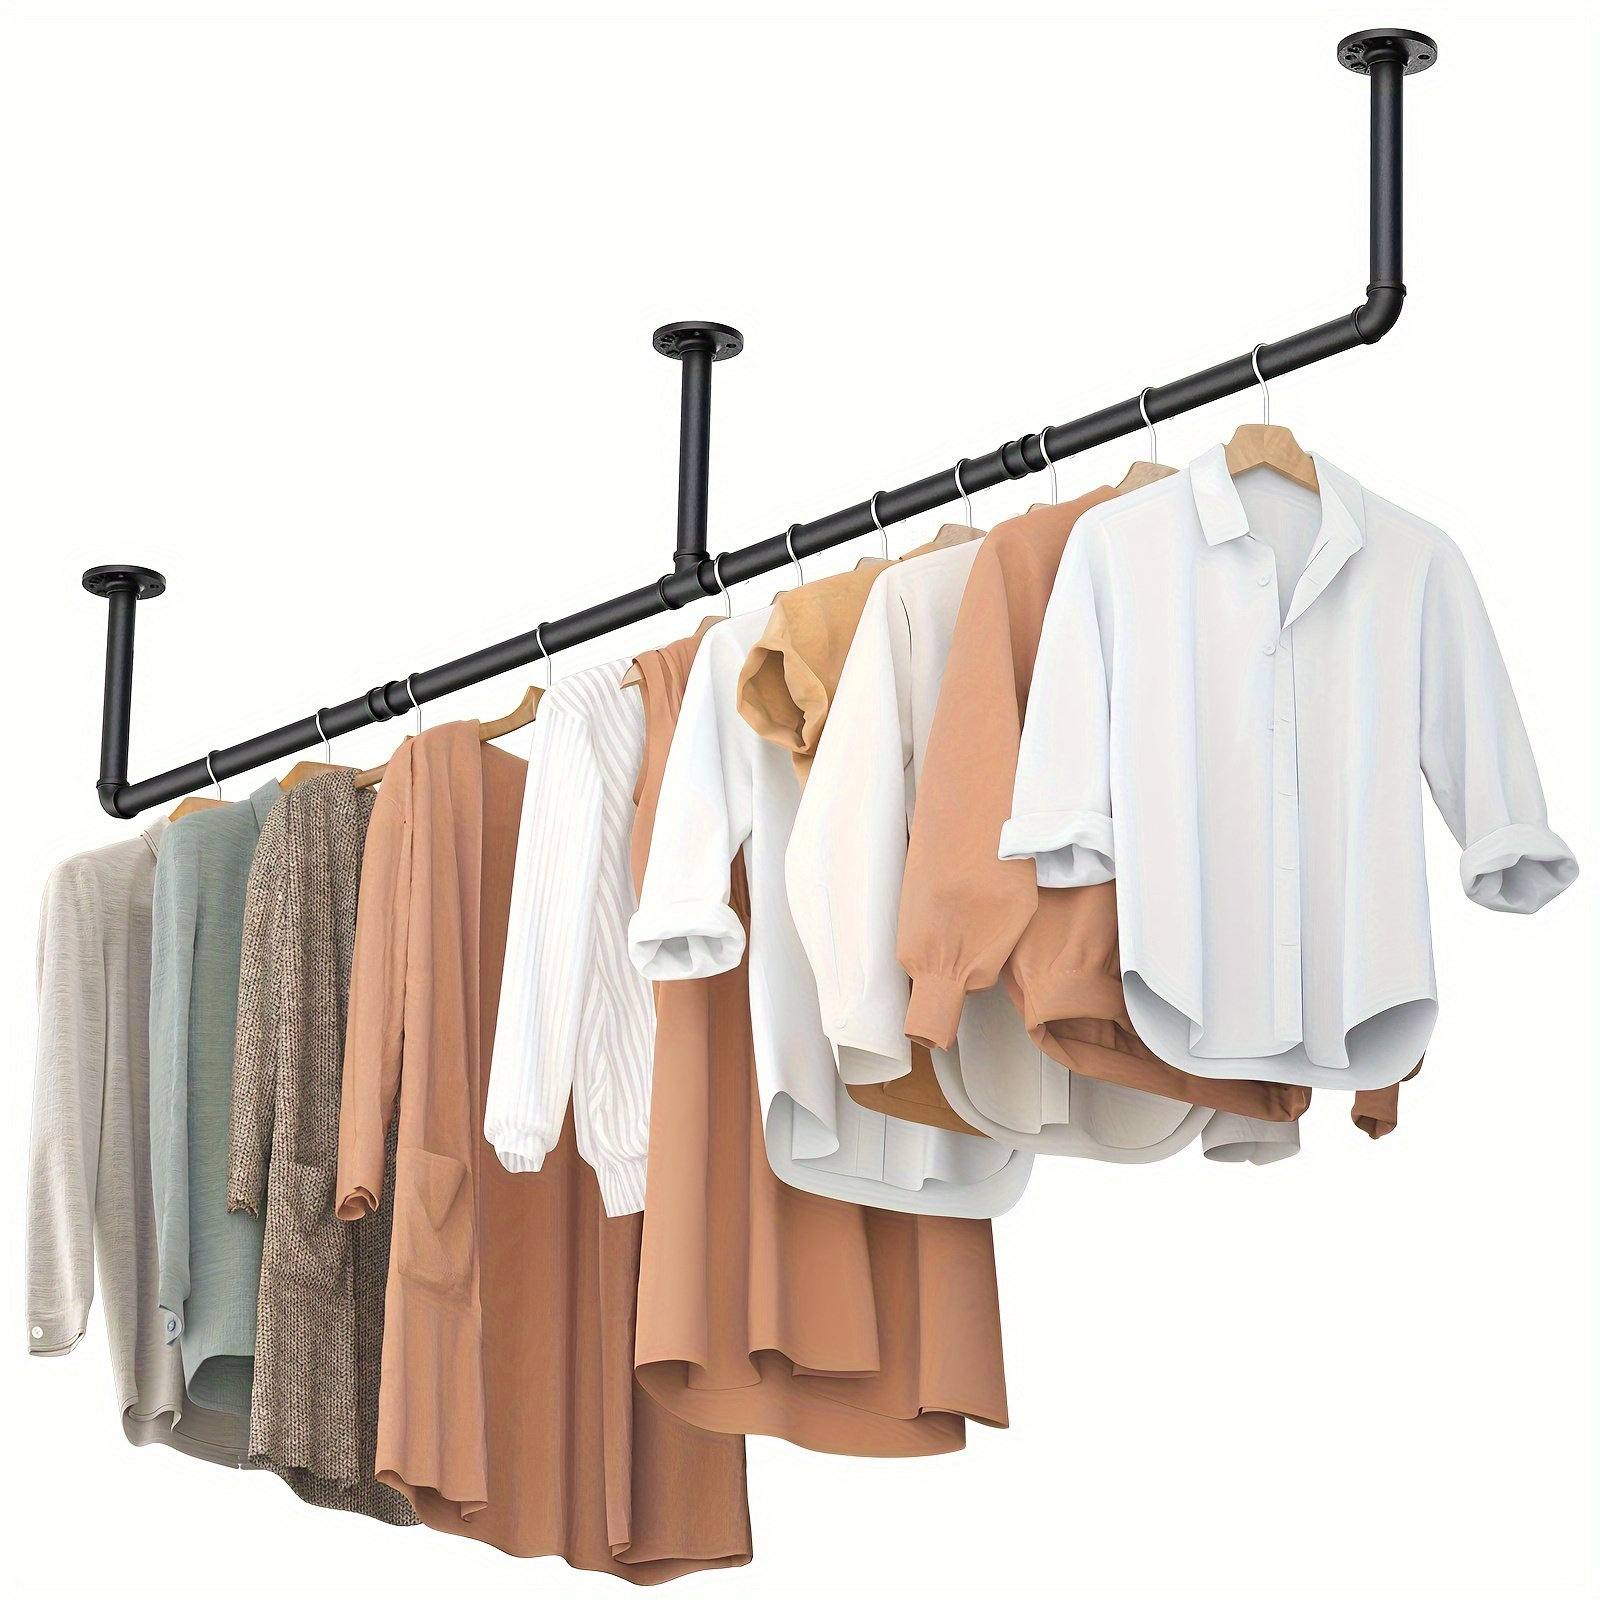 

Industrial Pipe Wall Mounted Garment Rack, Heavy Duty Metal Clothes Hanger, Space Saving Clothing Storage Rack For Pants And Clothes - Black (1 Pack)